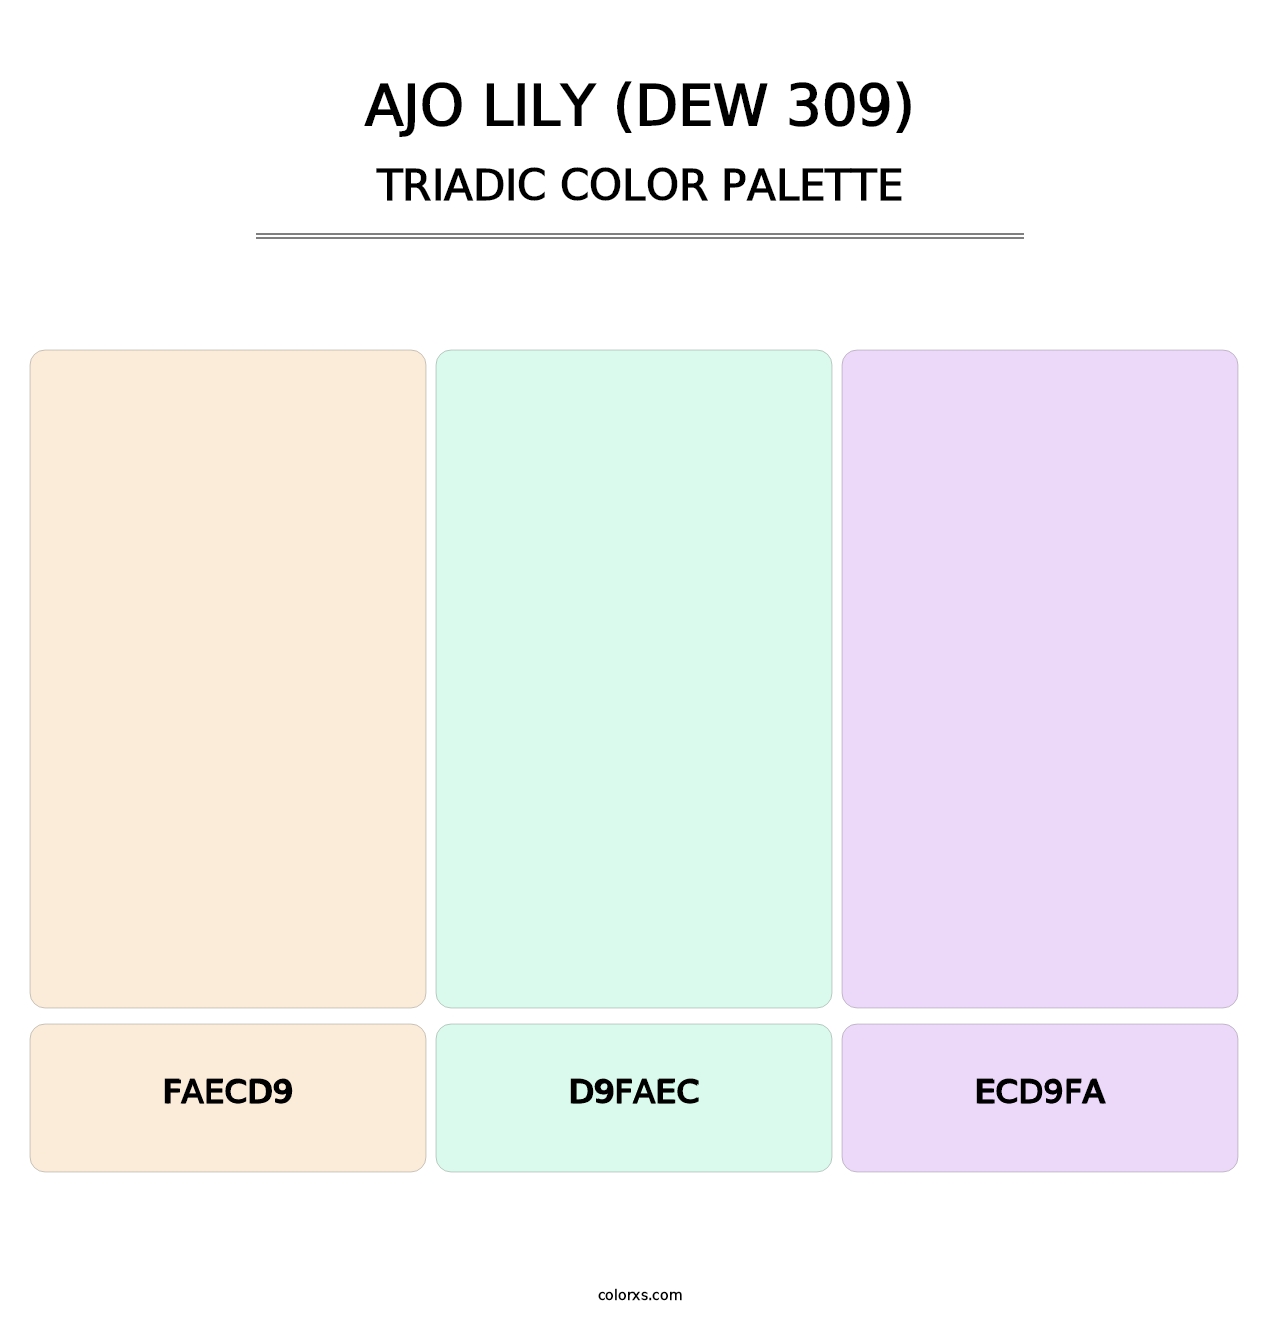 Ajo Lily (DEW 309) - Triadic Color Palette